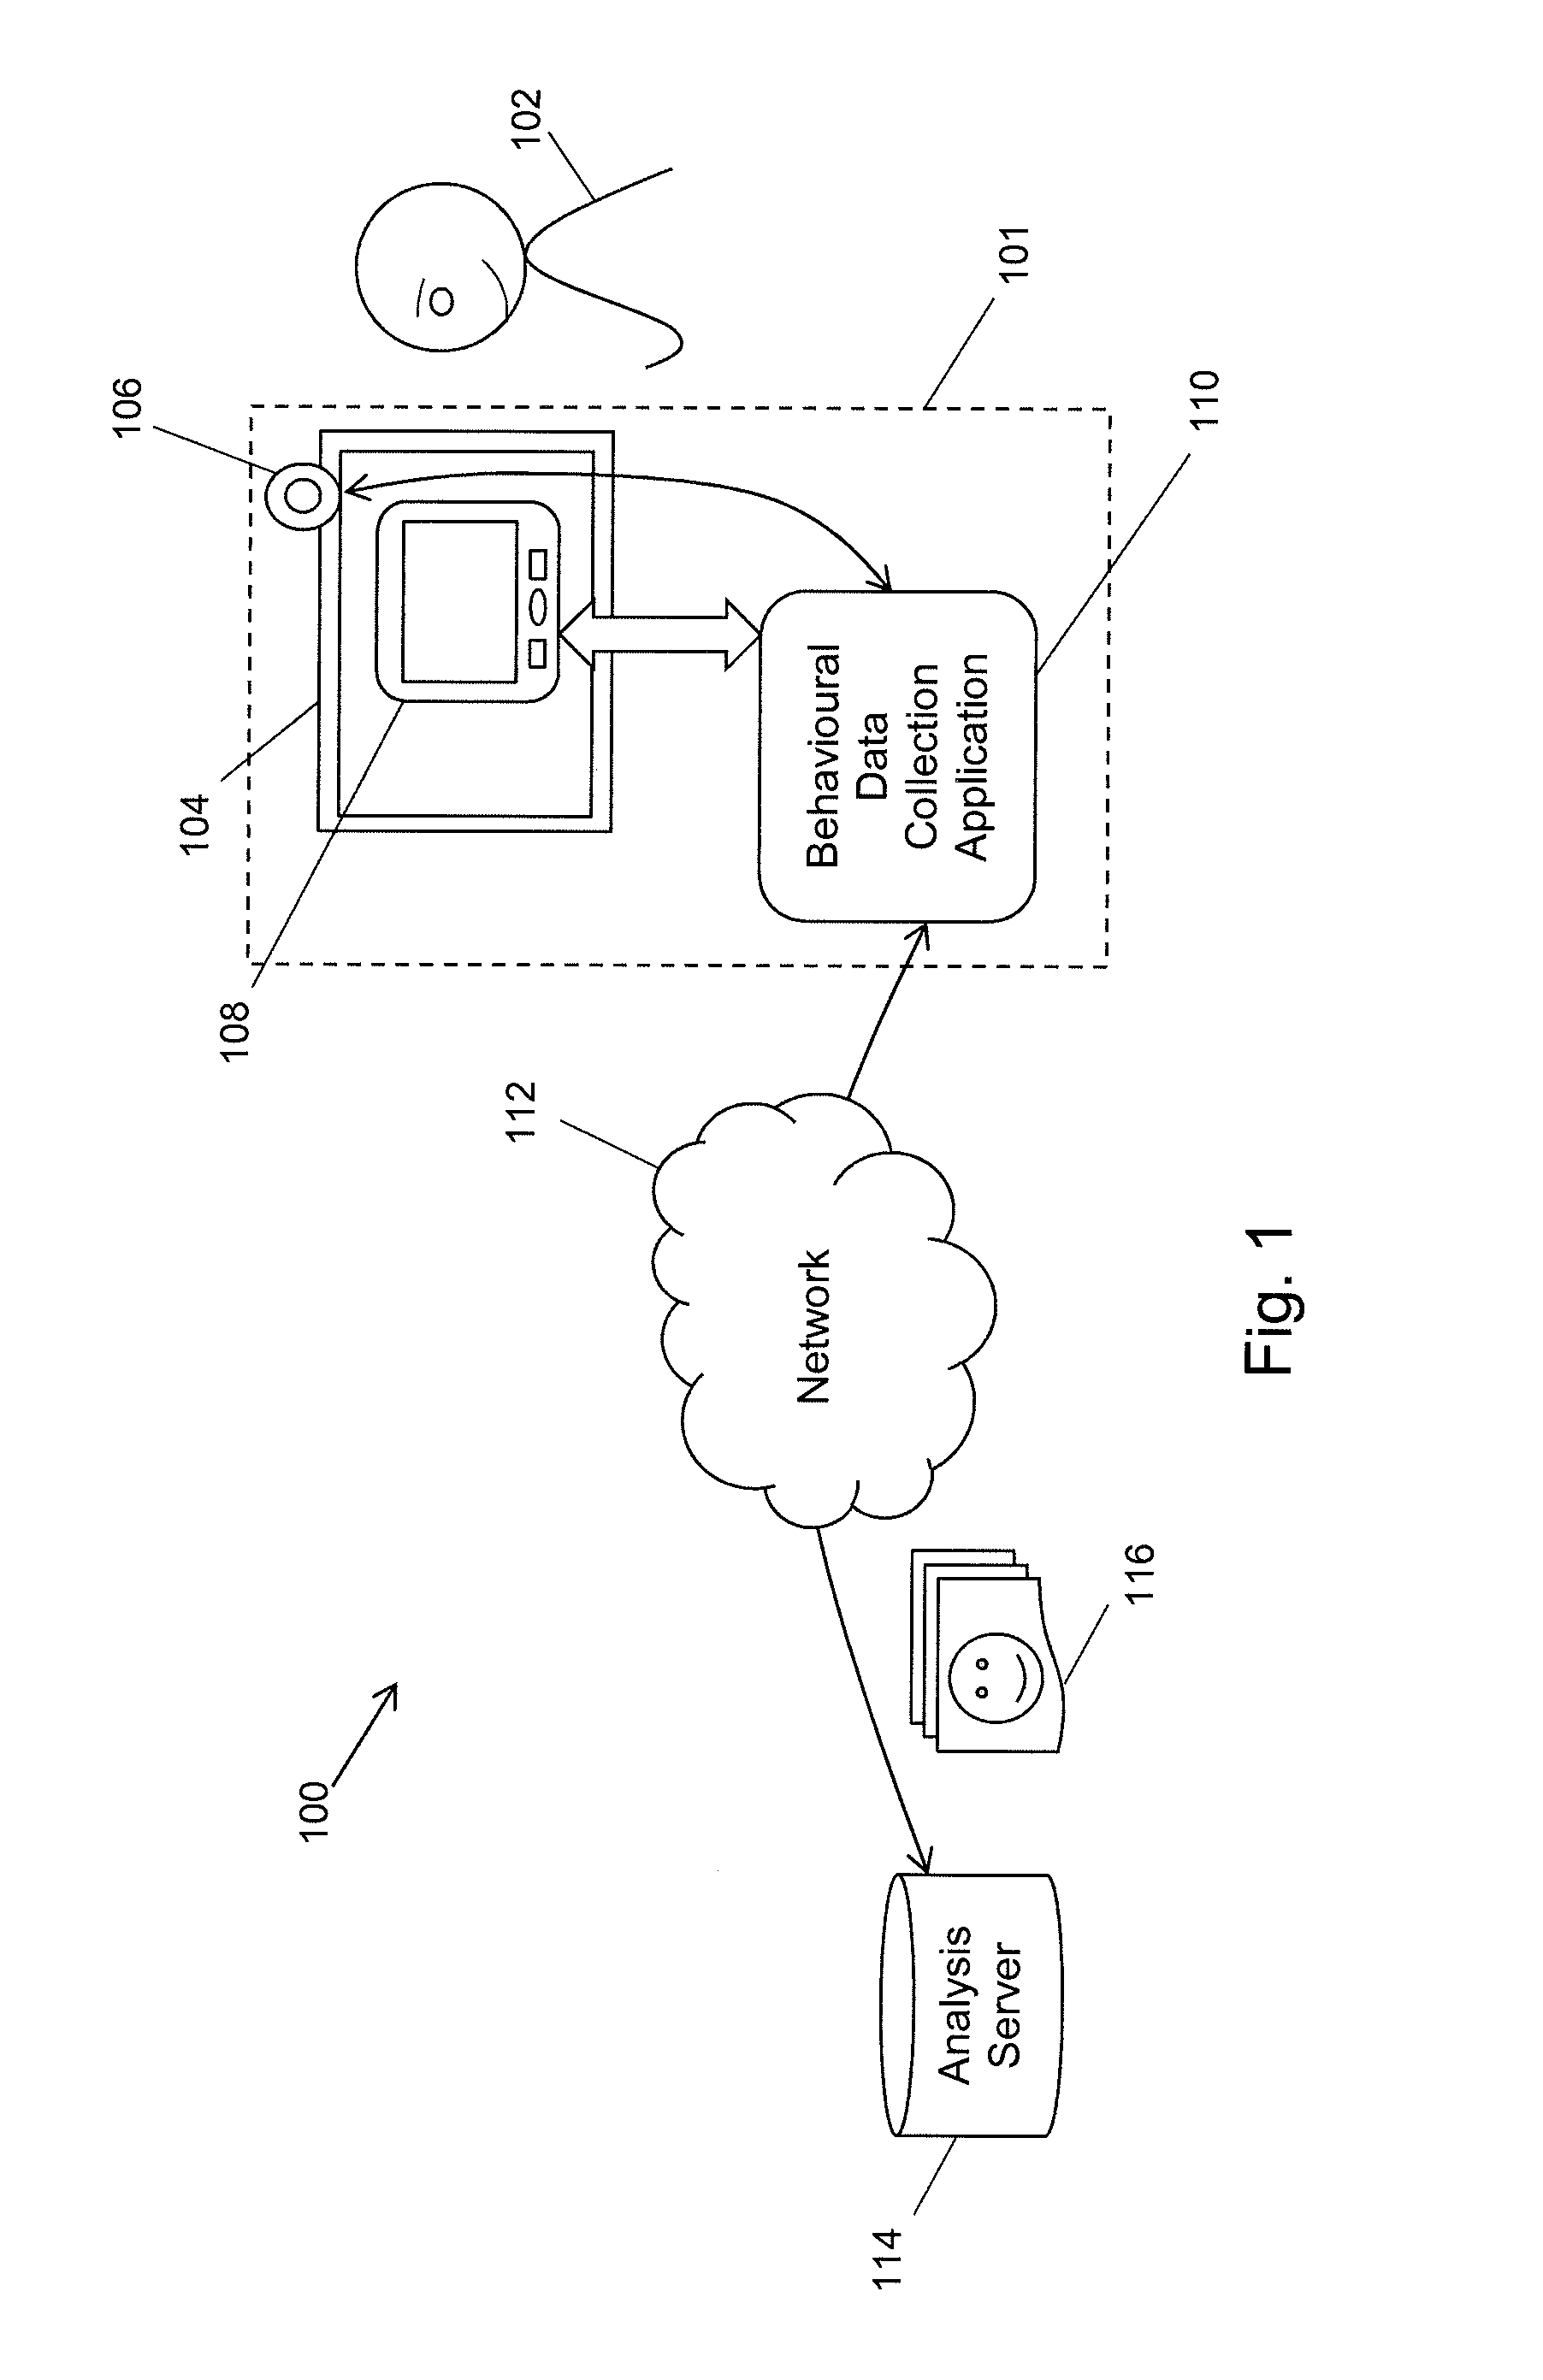 Method of quality analysis for computer user behavourial data collection processes